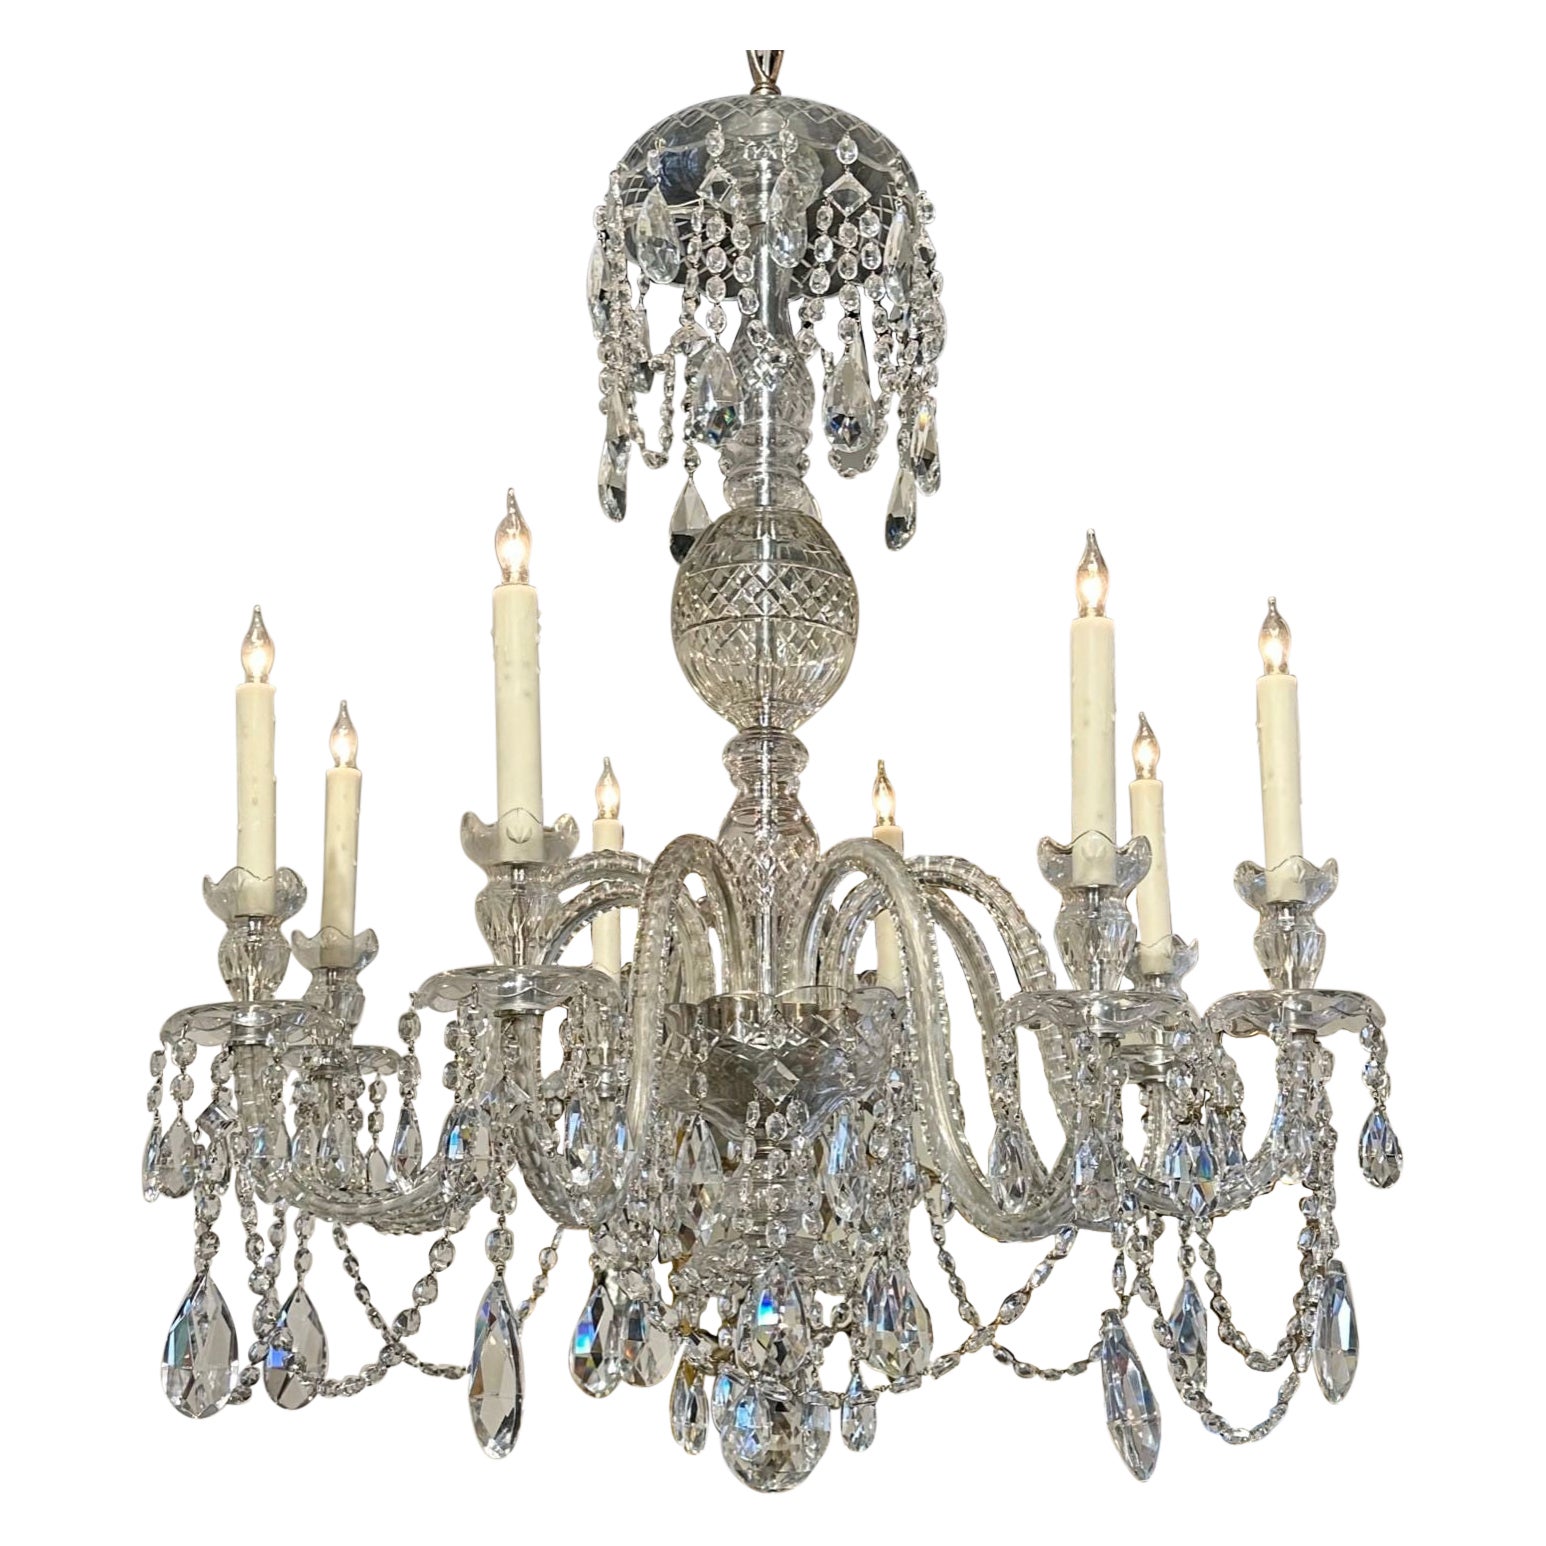 English Waterford Chandelier